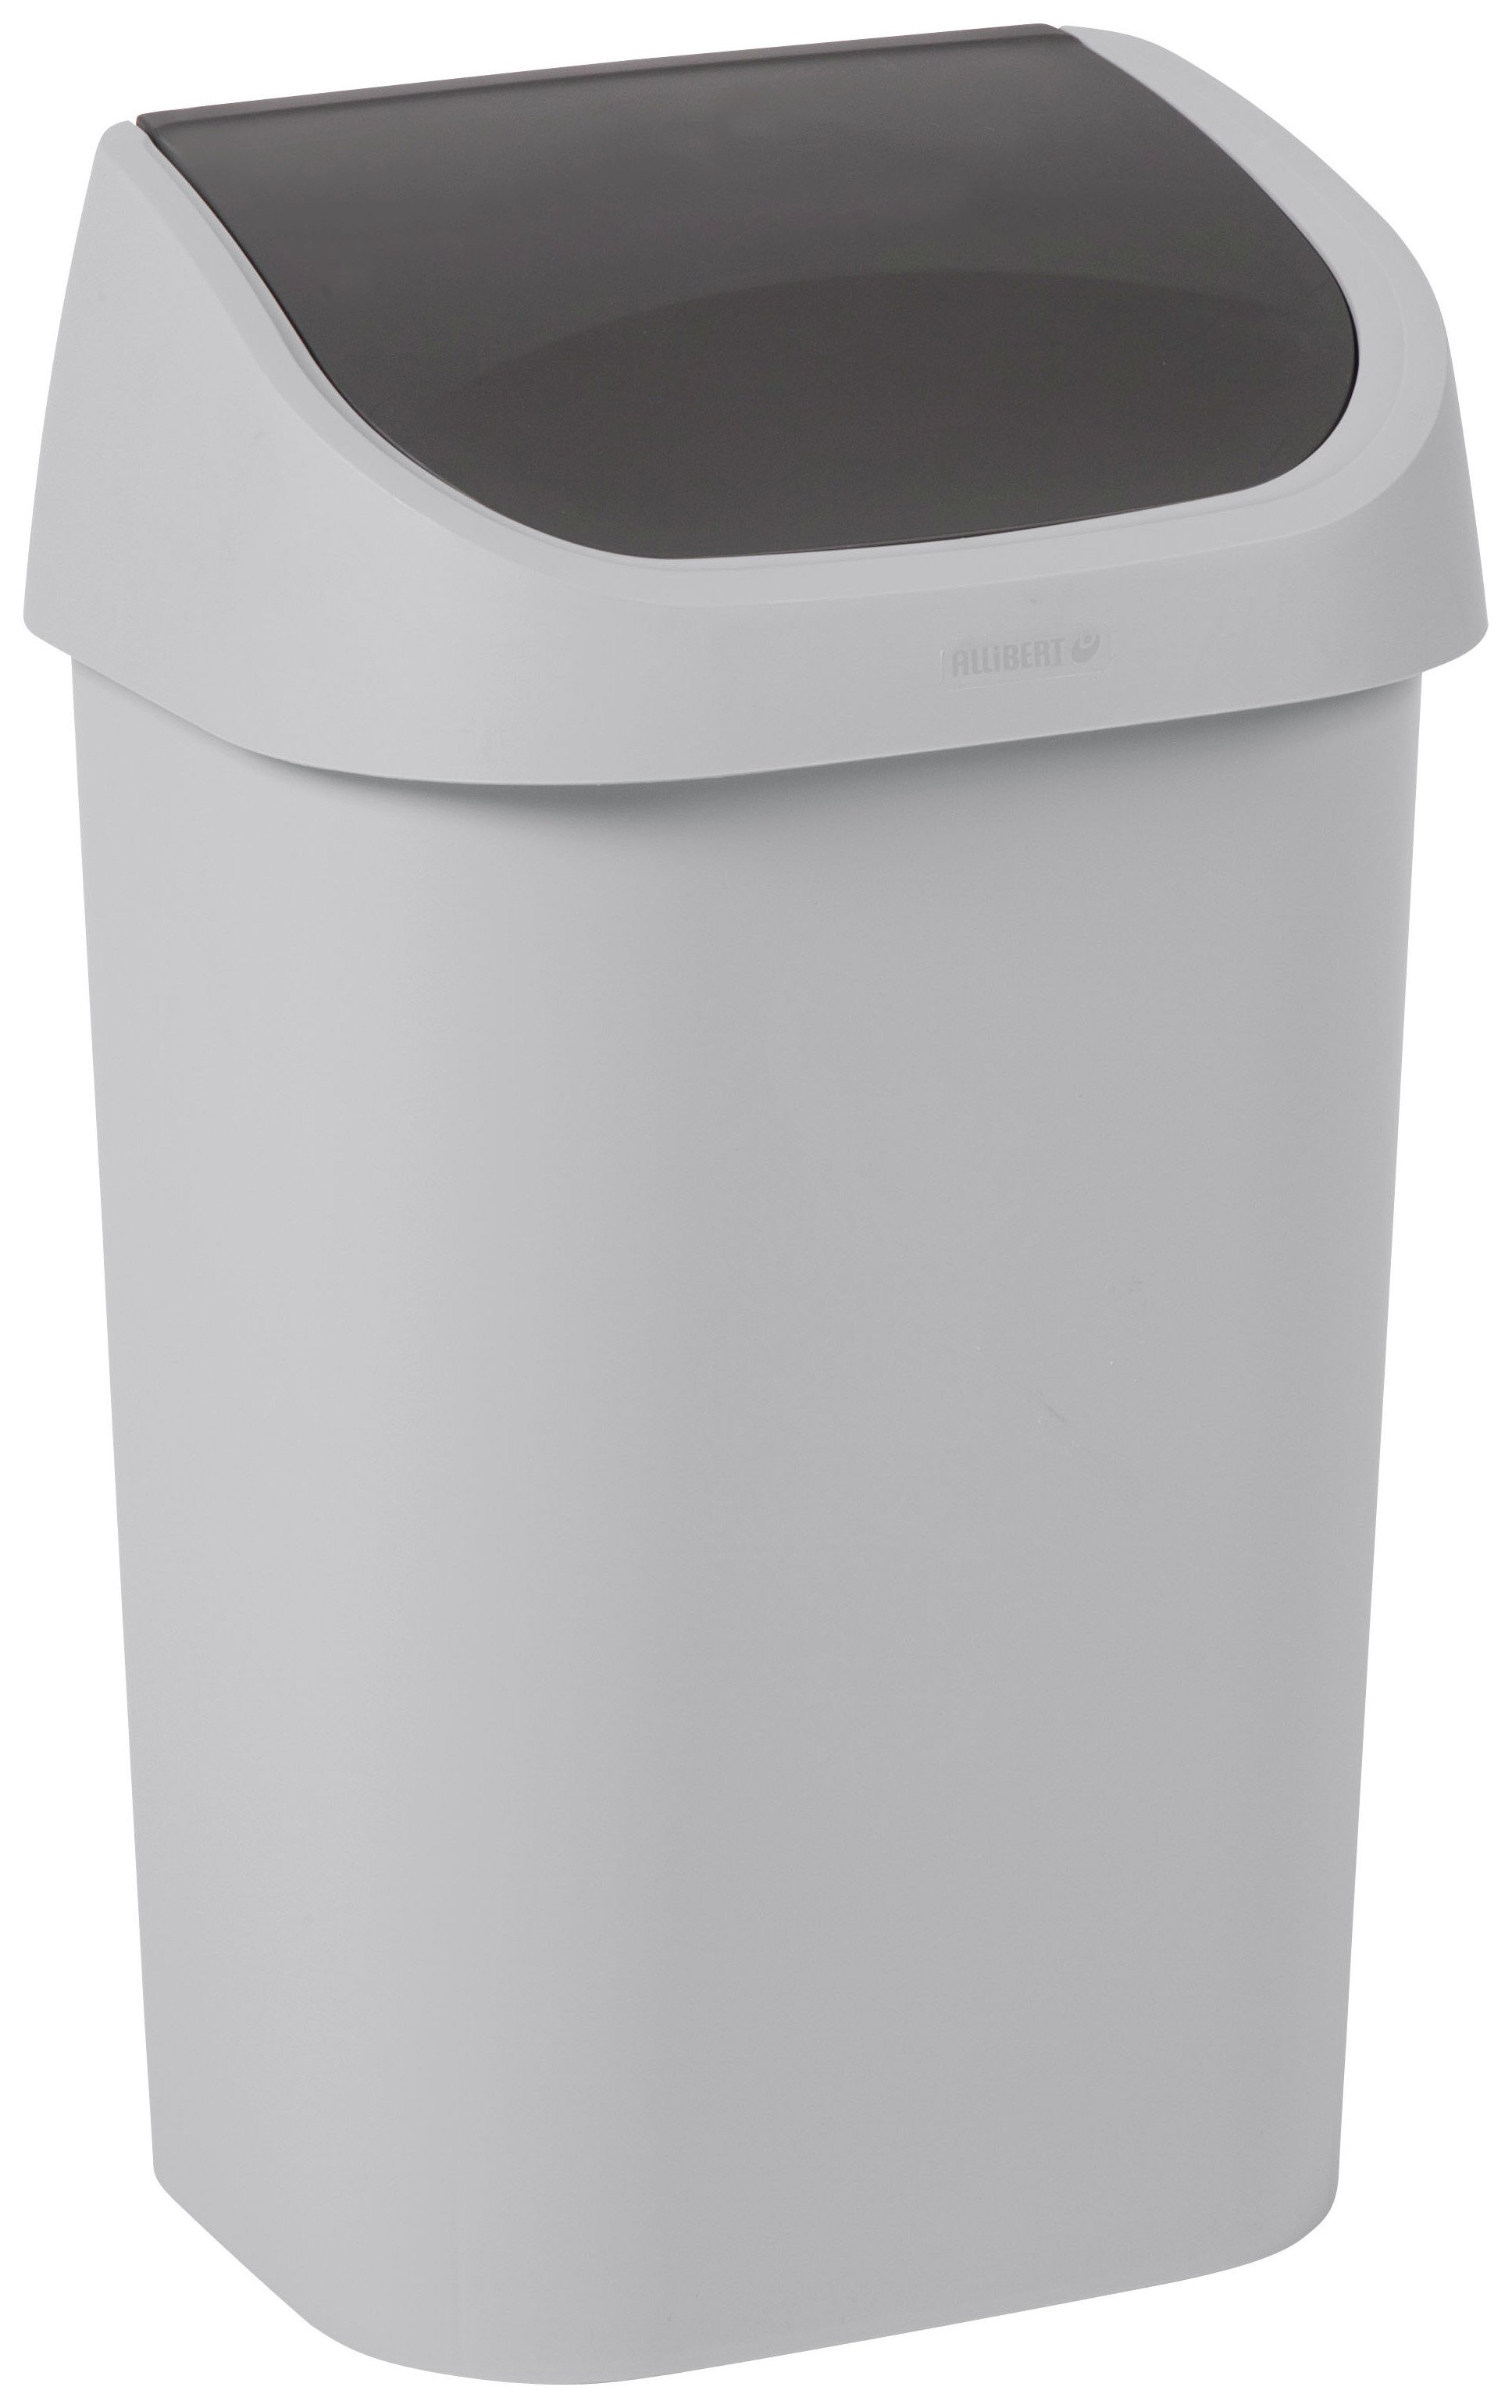 Curver Mistral 25 Litre Small Swing Bin Review